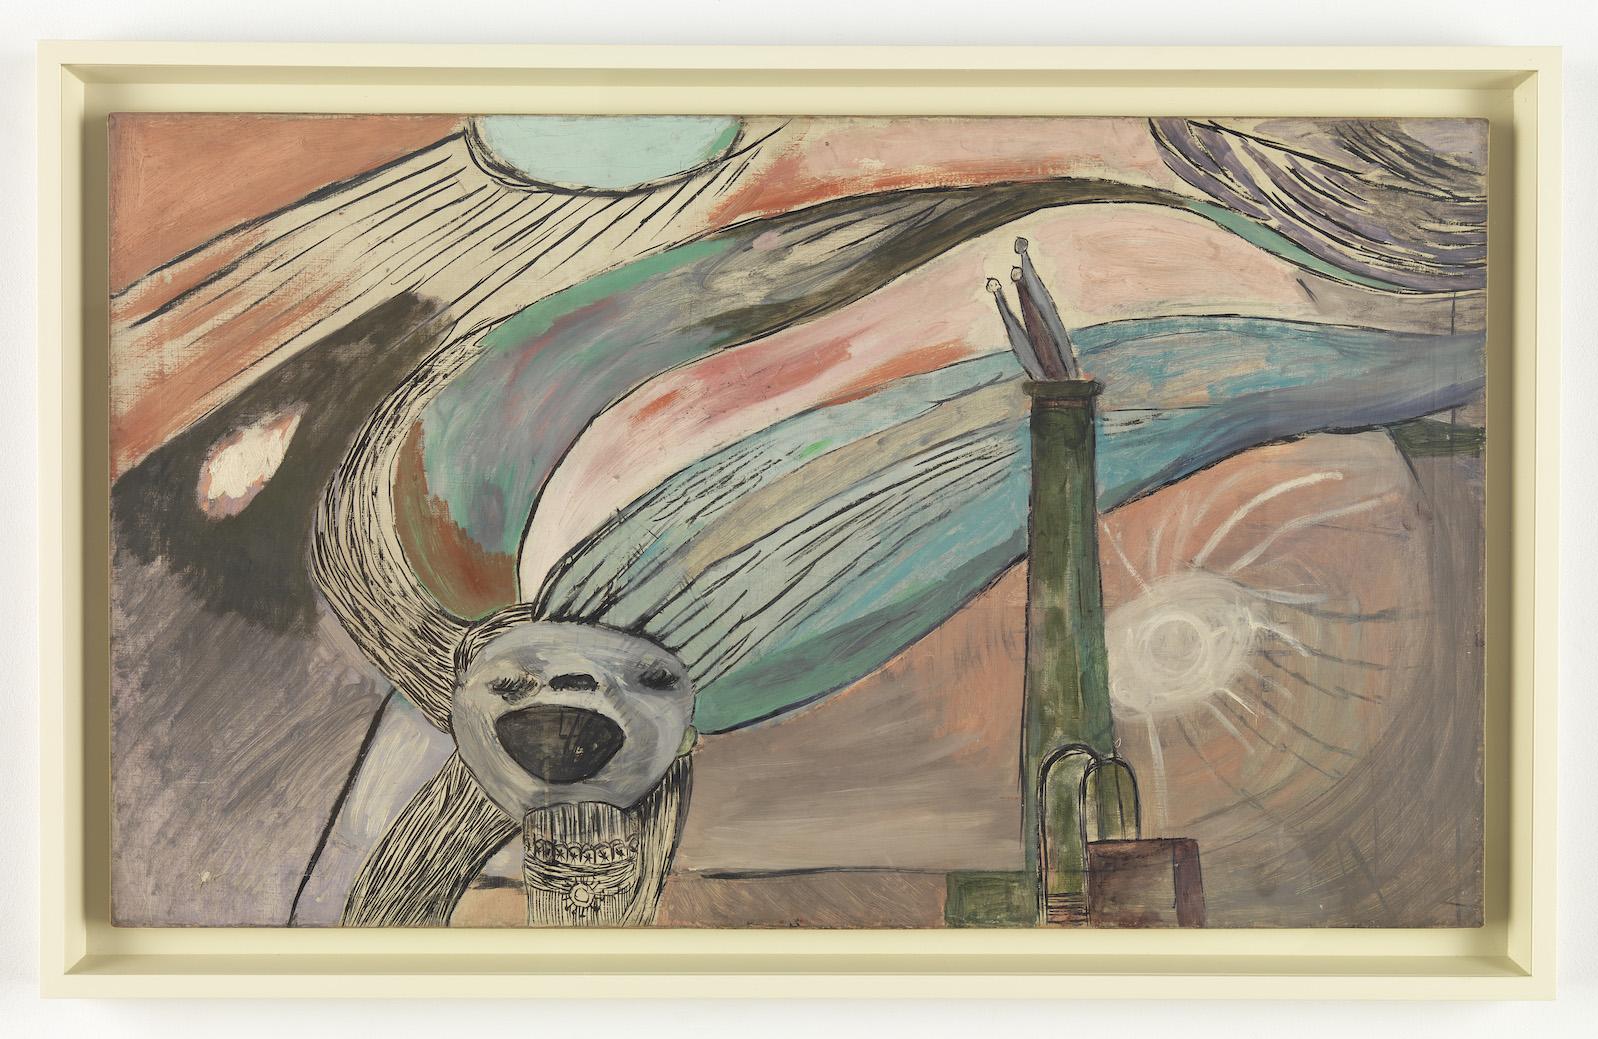 Louise Bourgeois' Early Paintings at The Met